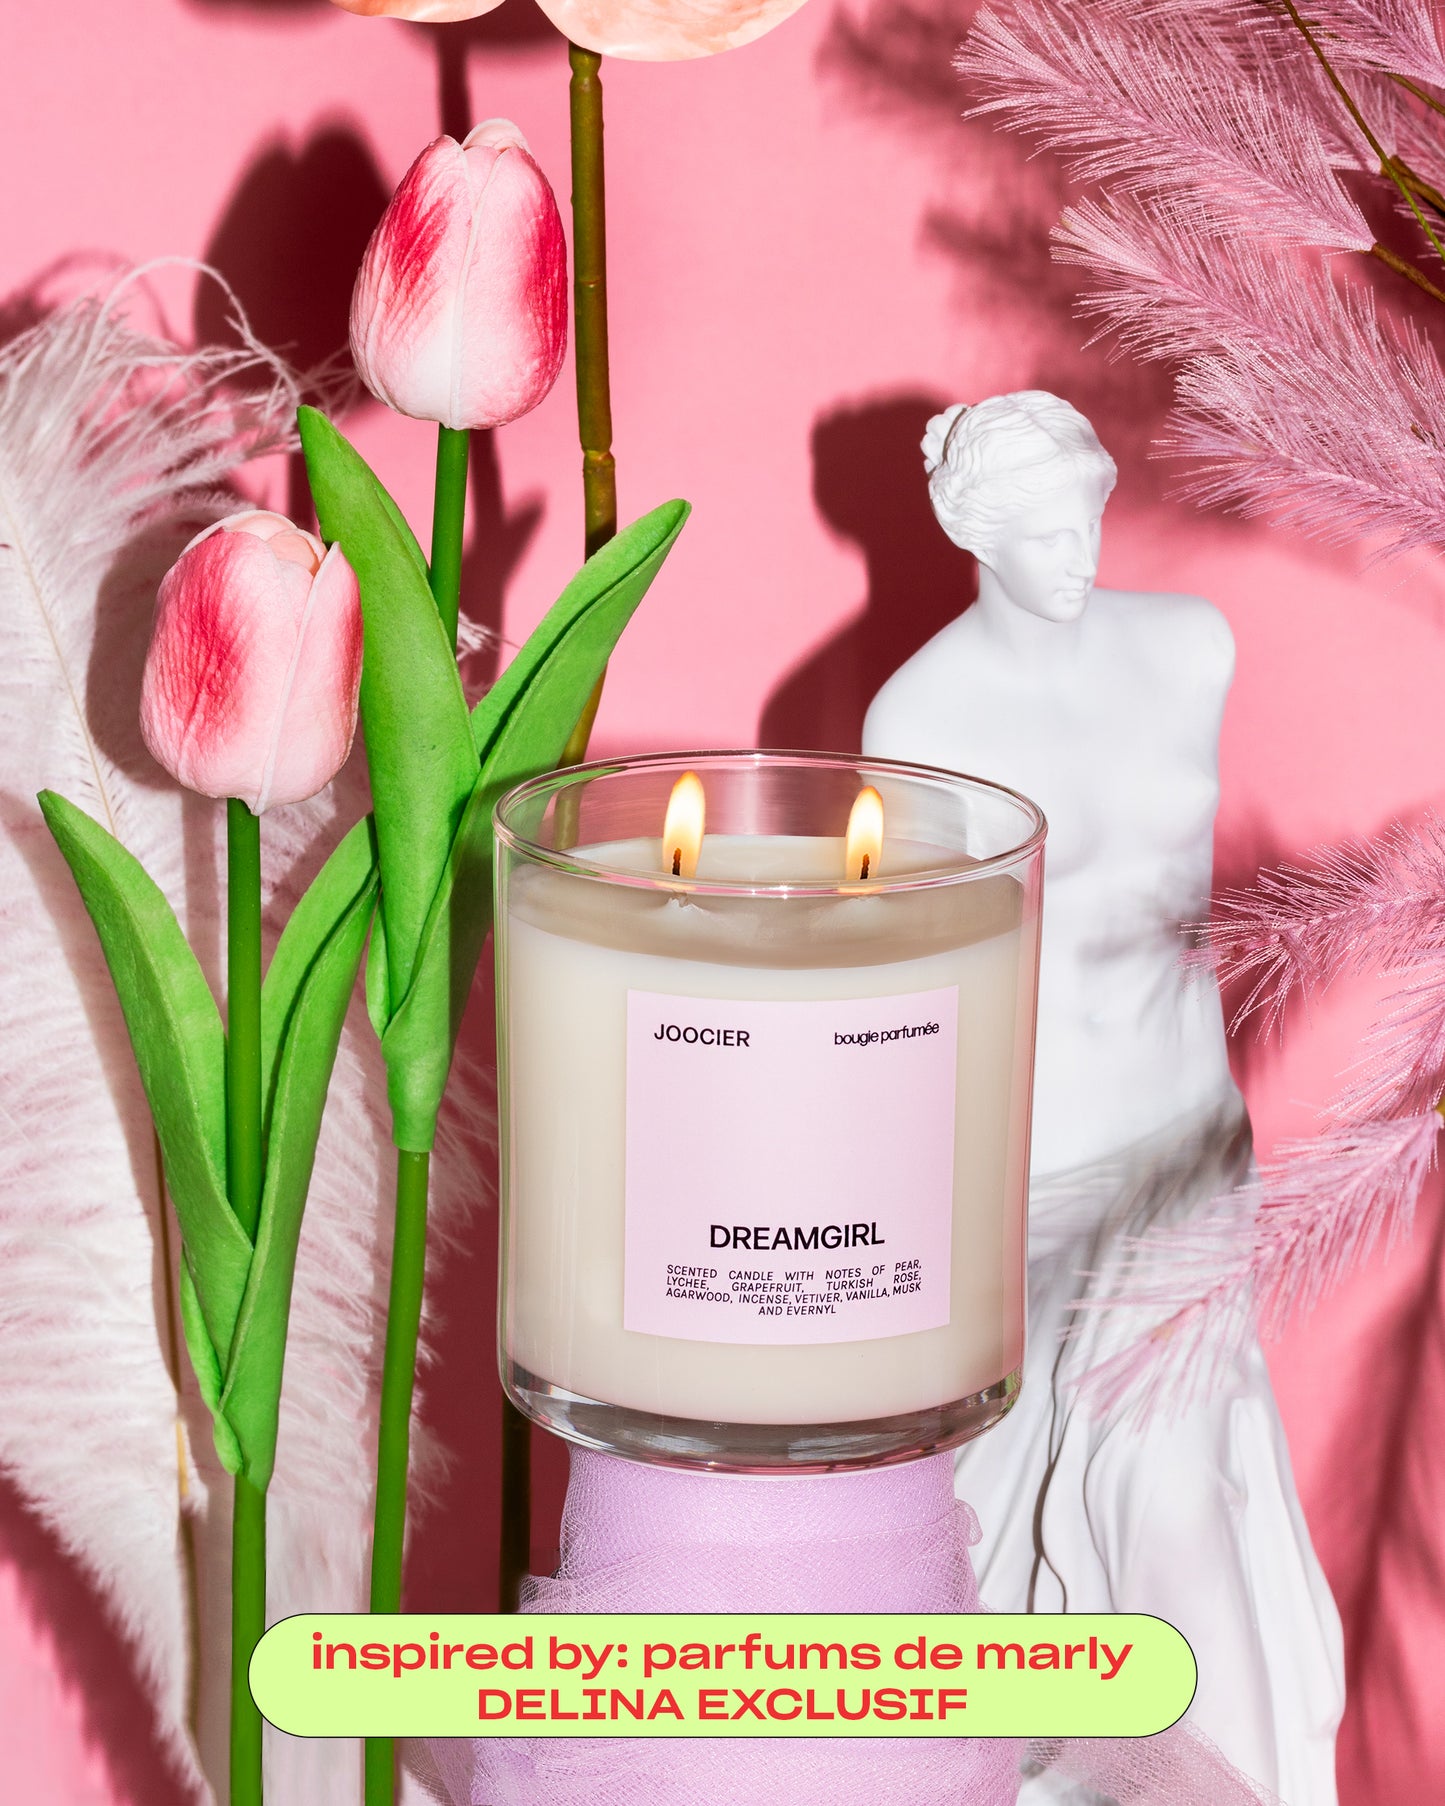 Delina dupe candle. A candle that smells like parfums de marly Delina Exclusive. Pear, lychee, grapefruit, Turkish rose, Starwood, incense, vetiver, vanilla, musk scented candle. A fruity incense candle by Joocier. A gourmand scent that is also warm and complex.